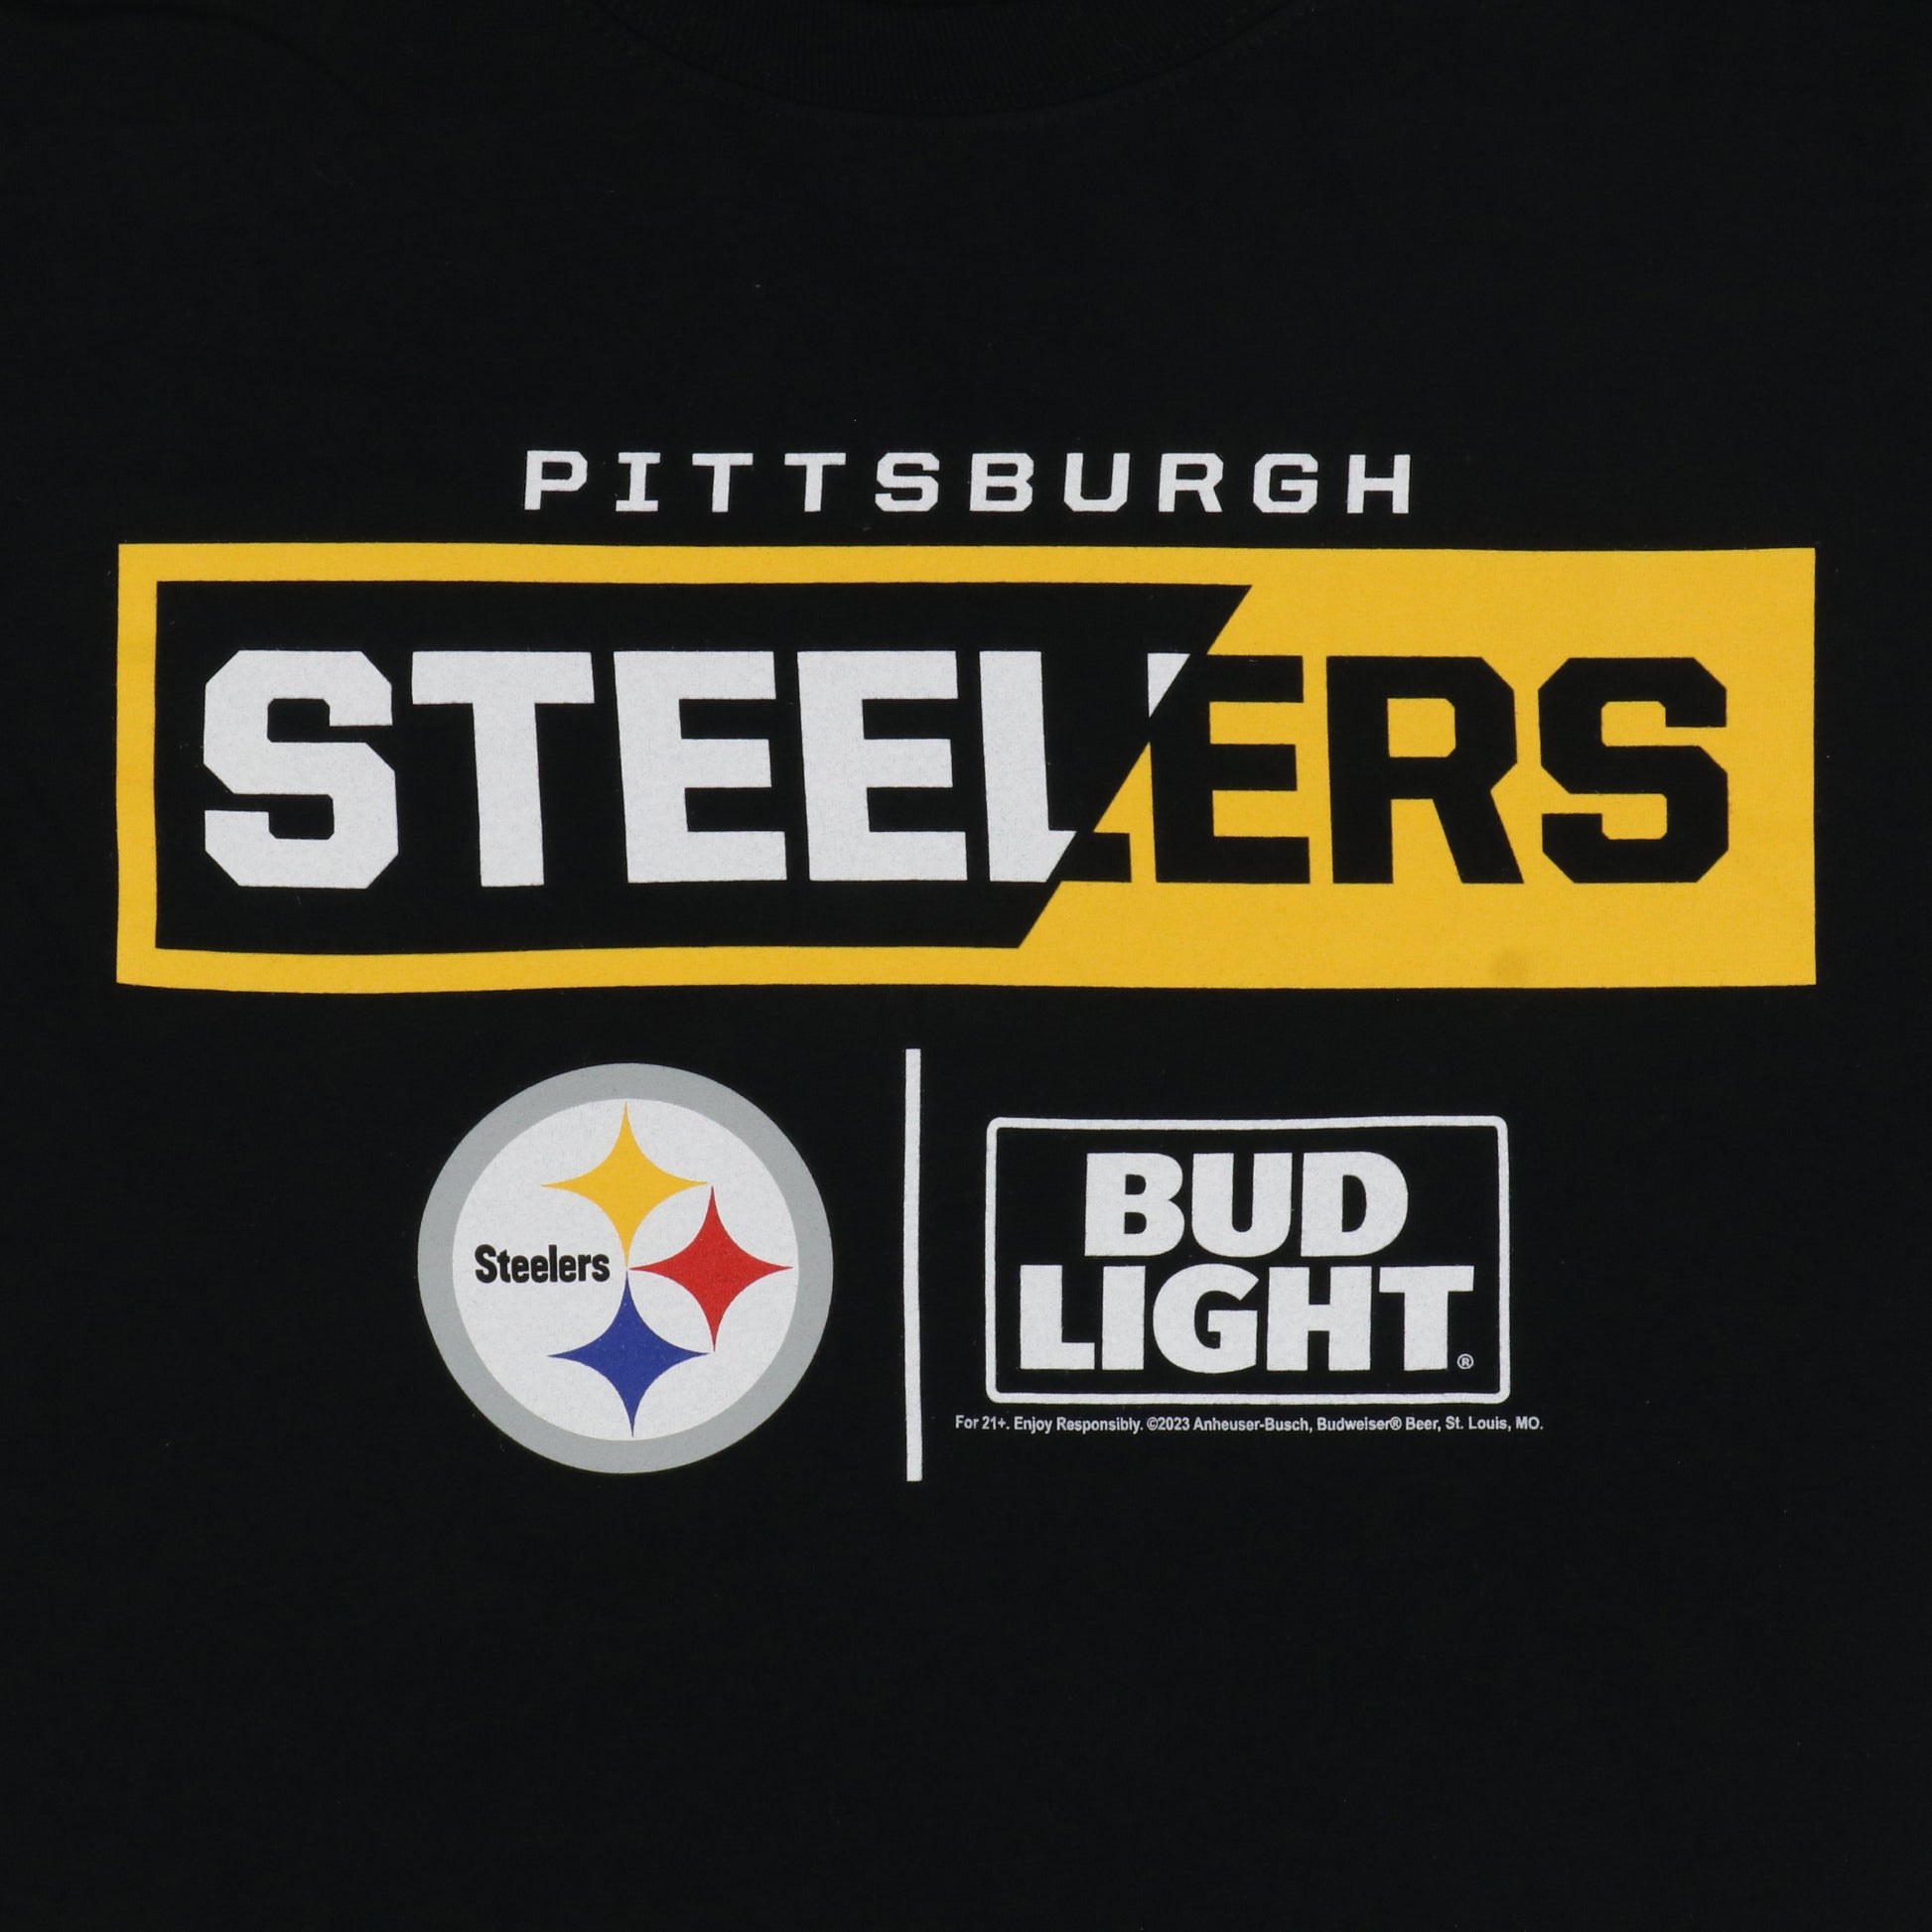 Zoom in on Steelers x Bud Light graphic